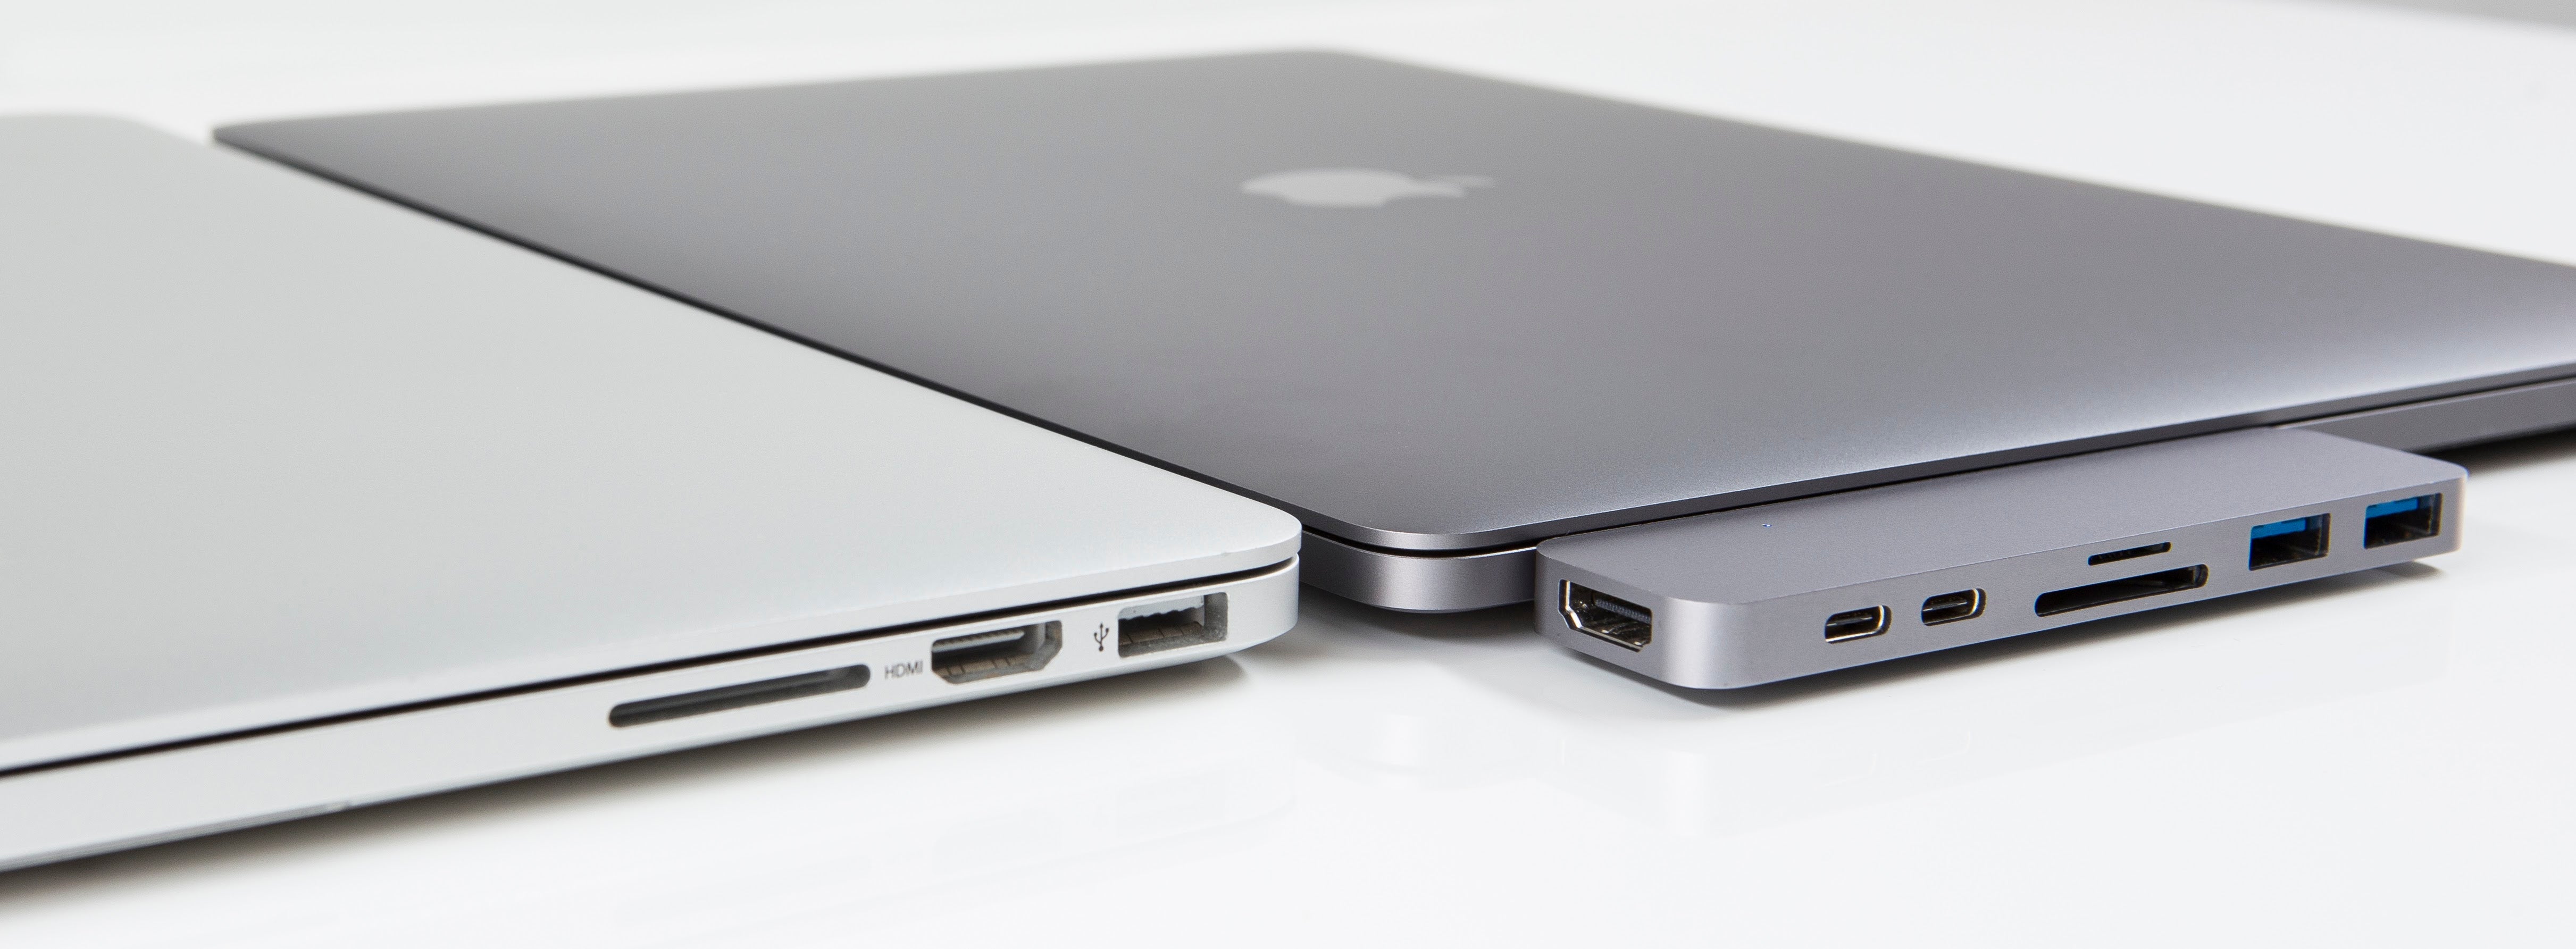 30K paid $3M on Kickstarter to give new MacBook same ports as last one –